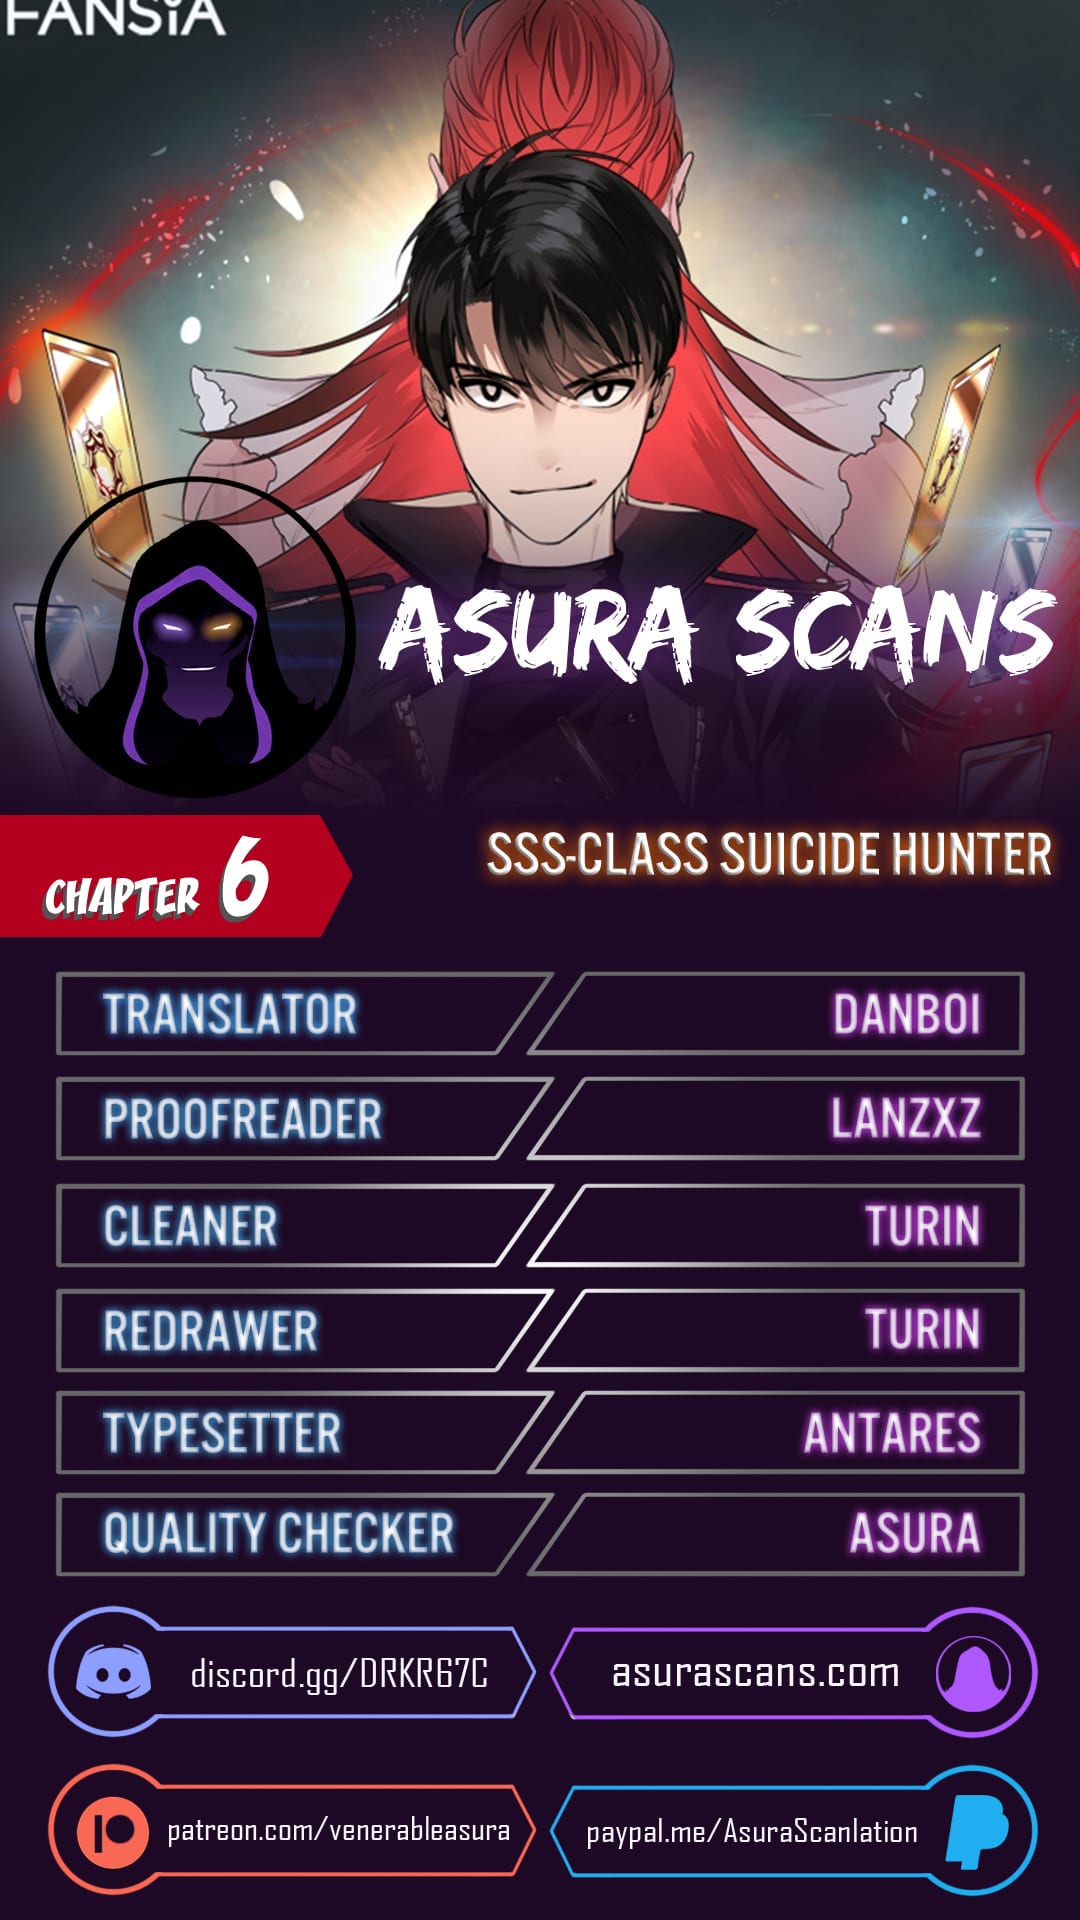 SSS-Class Suicide Hunter chapter 6